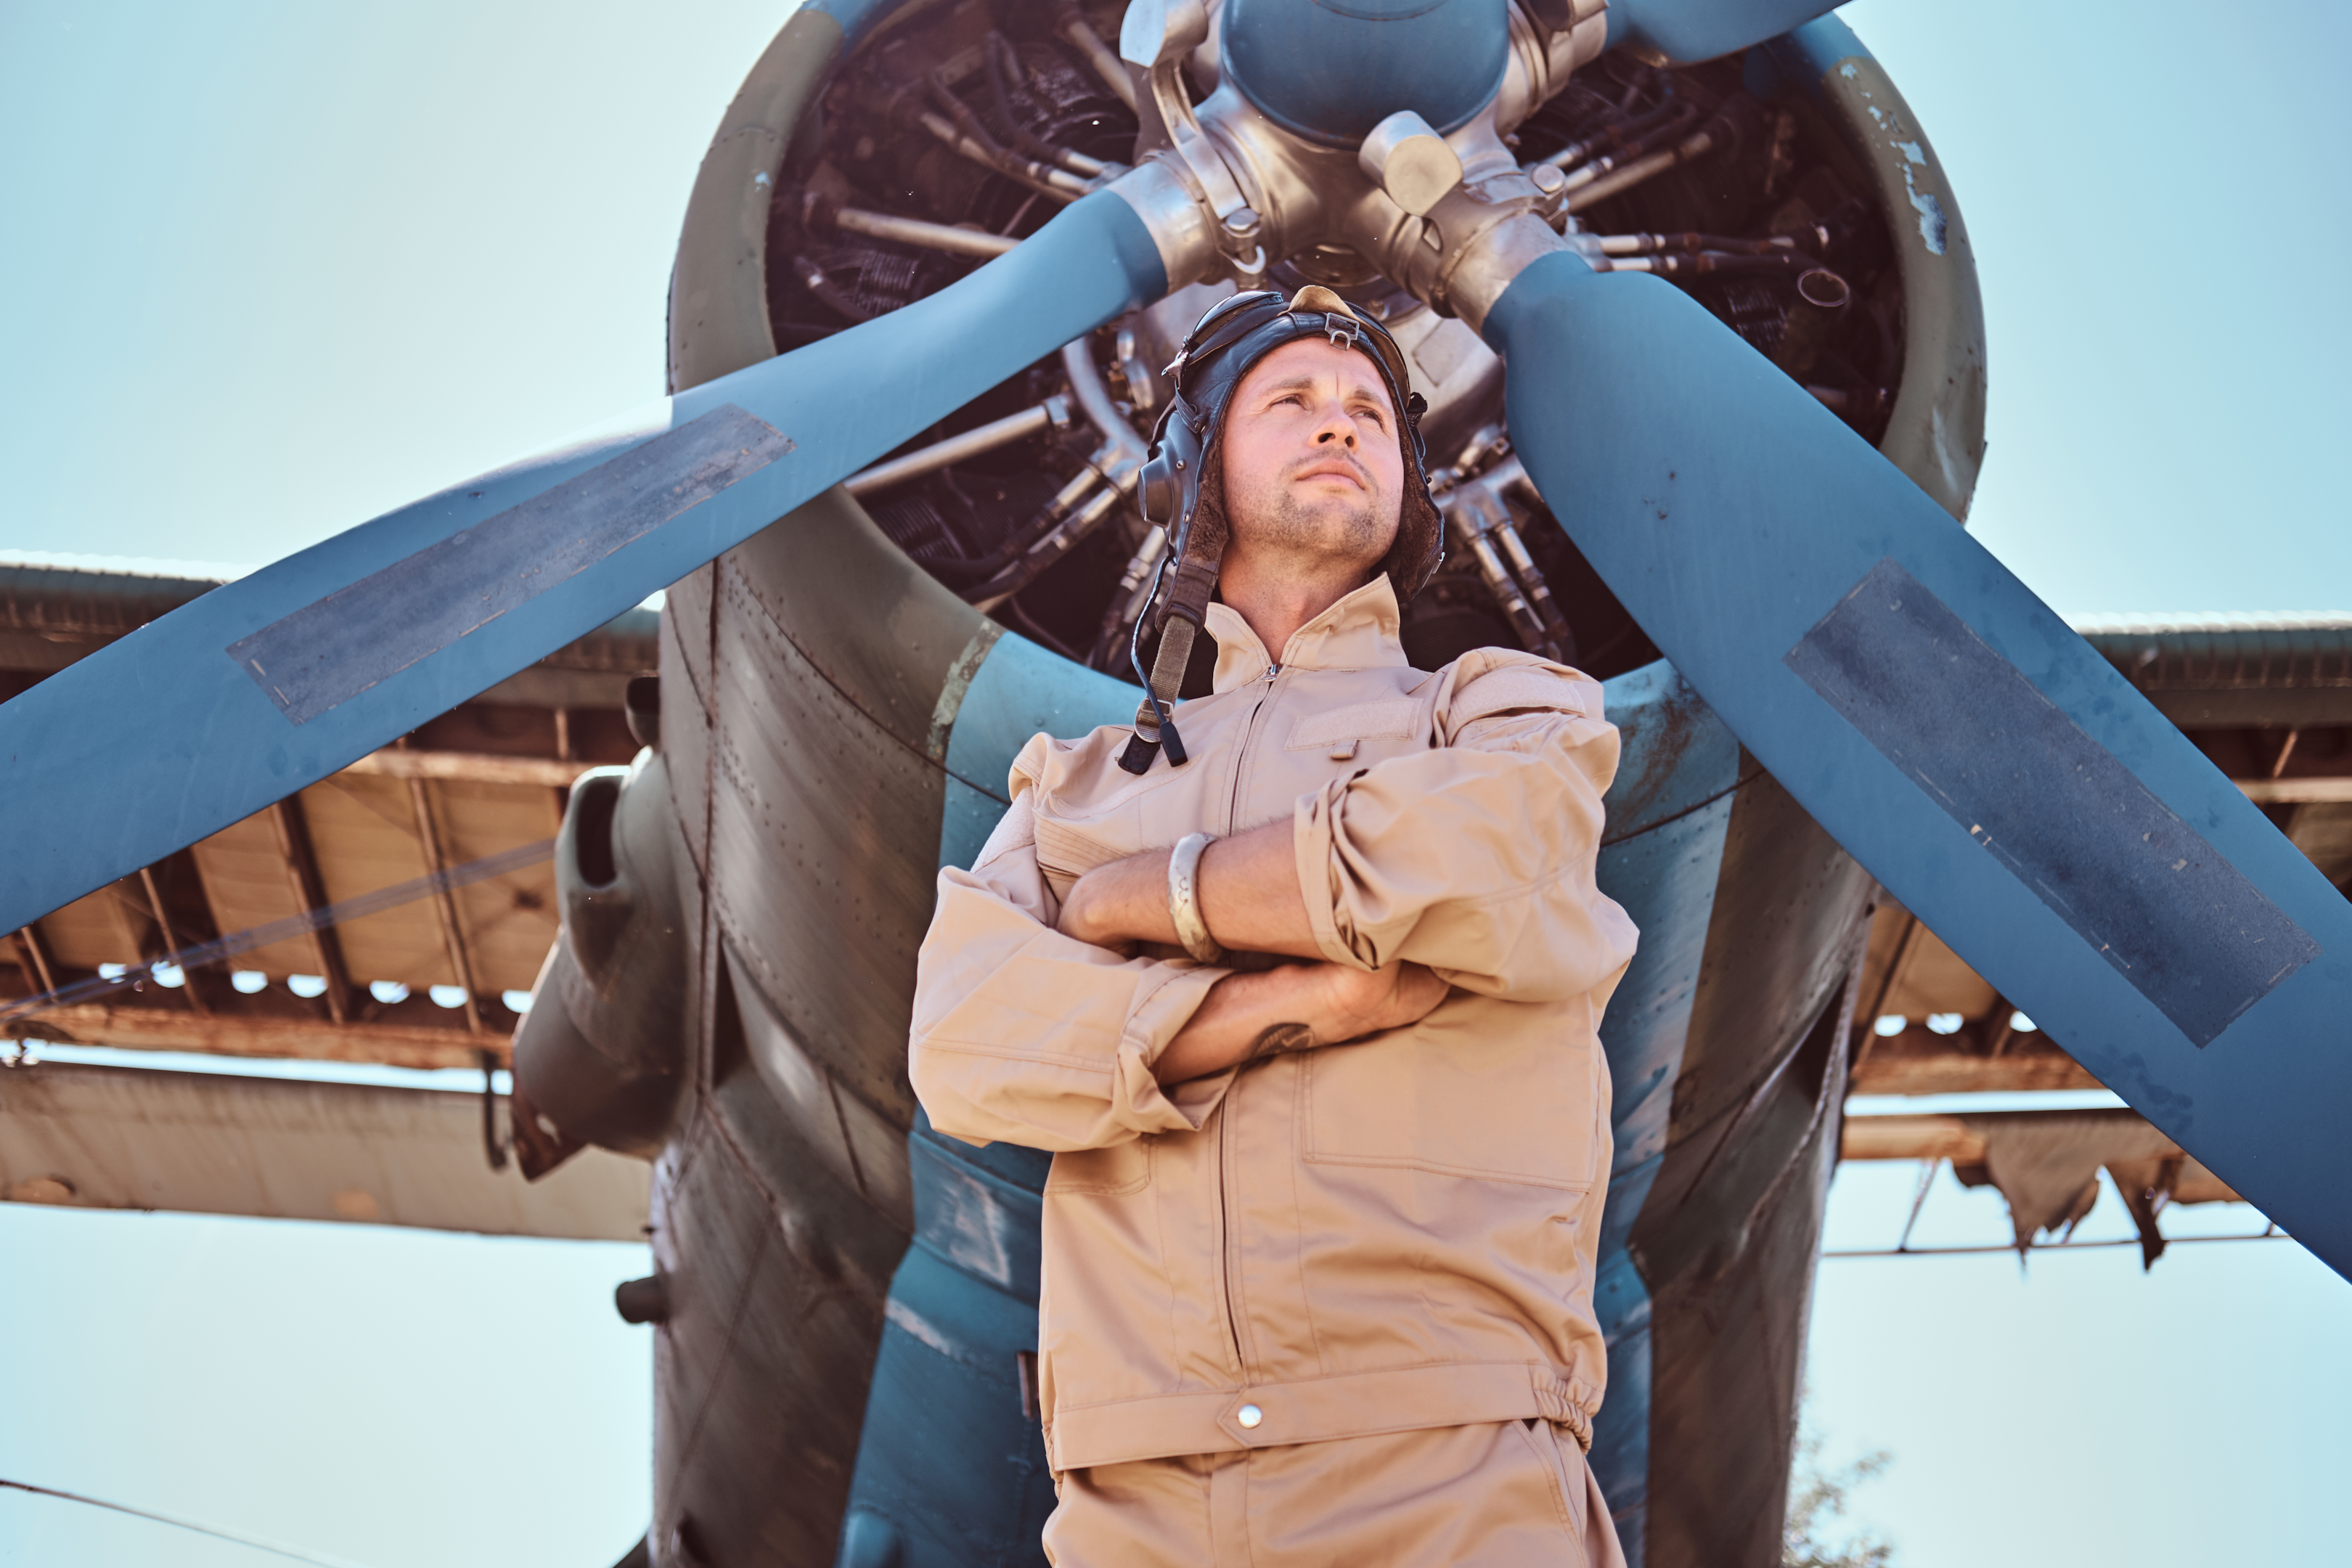 A private pilot certificate holder in a flight suit standing in front of a plane